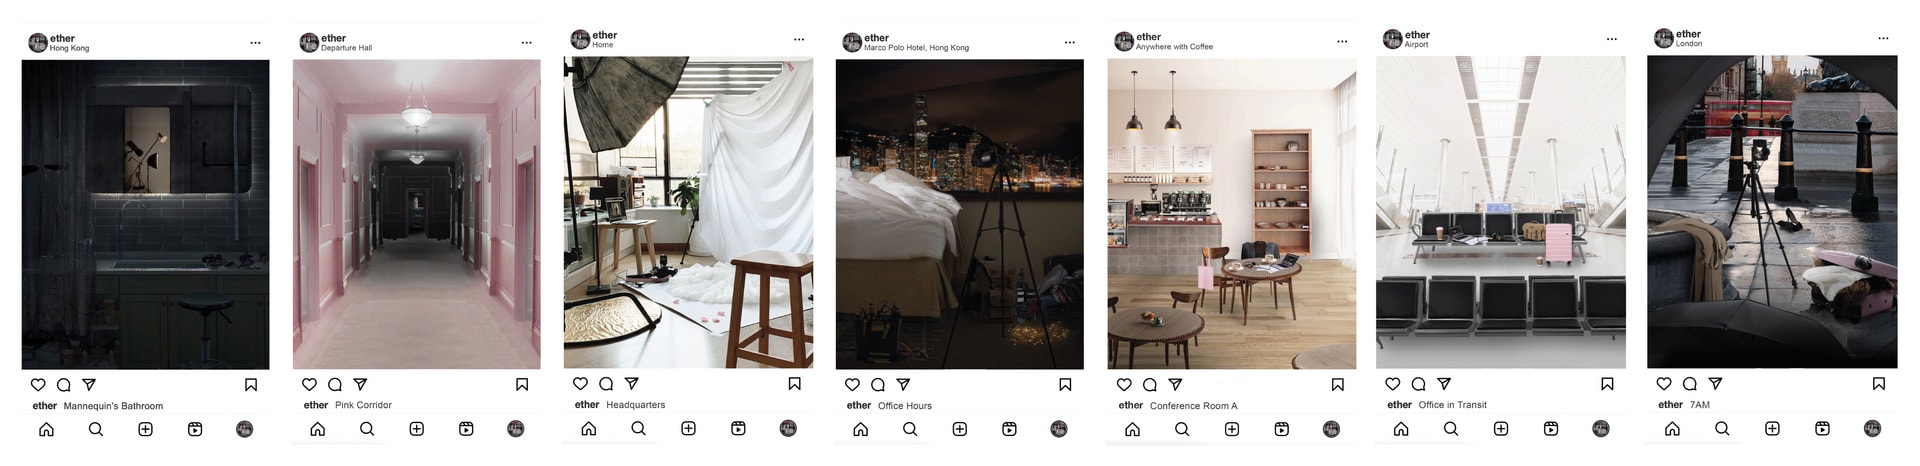 Social media travel content creator journey. Instagram posts as a storytelling device